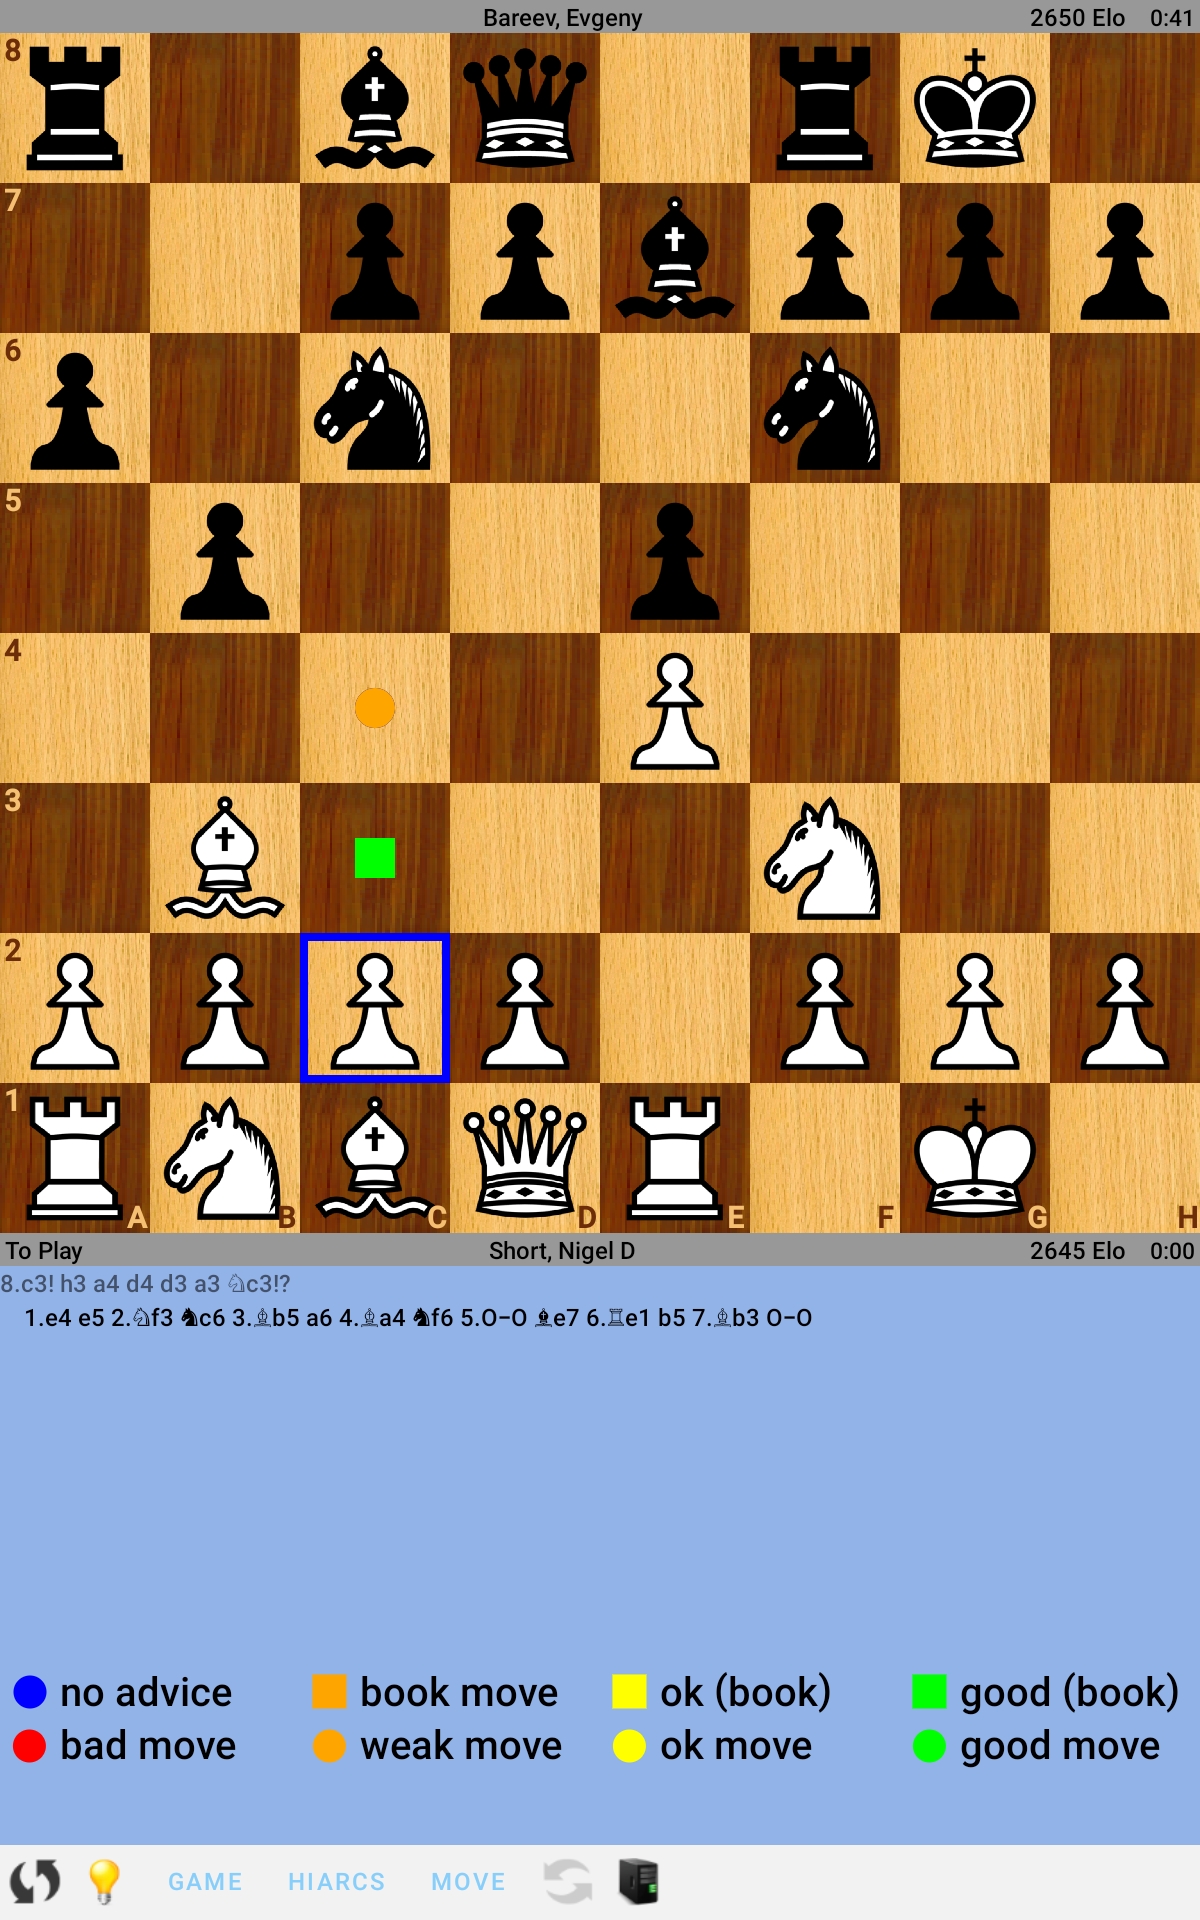 Download Chess Openings Explorer Pro for Android - Chess Openings Explorer Pro  APK Download 